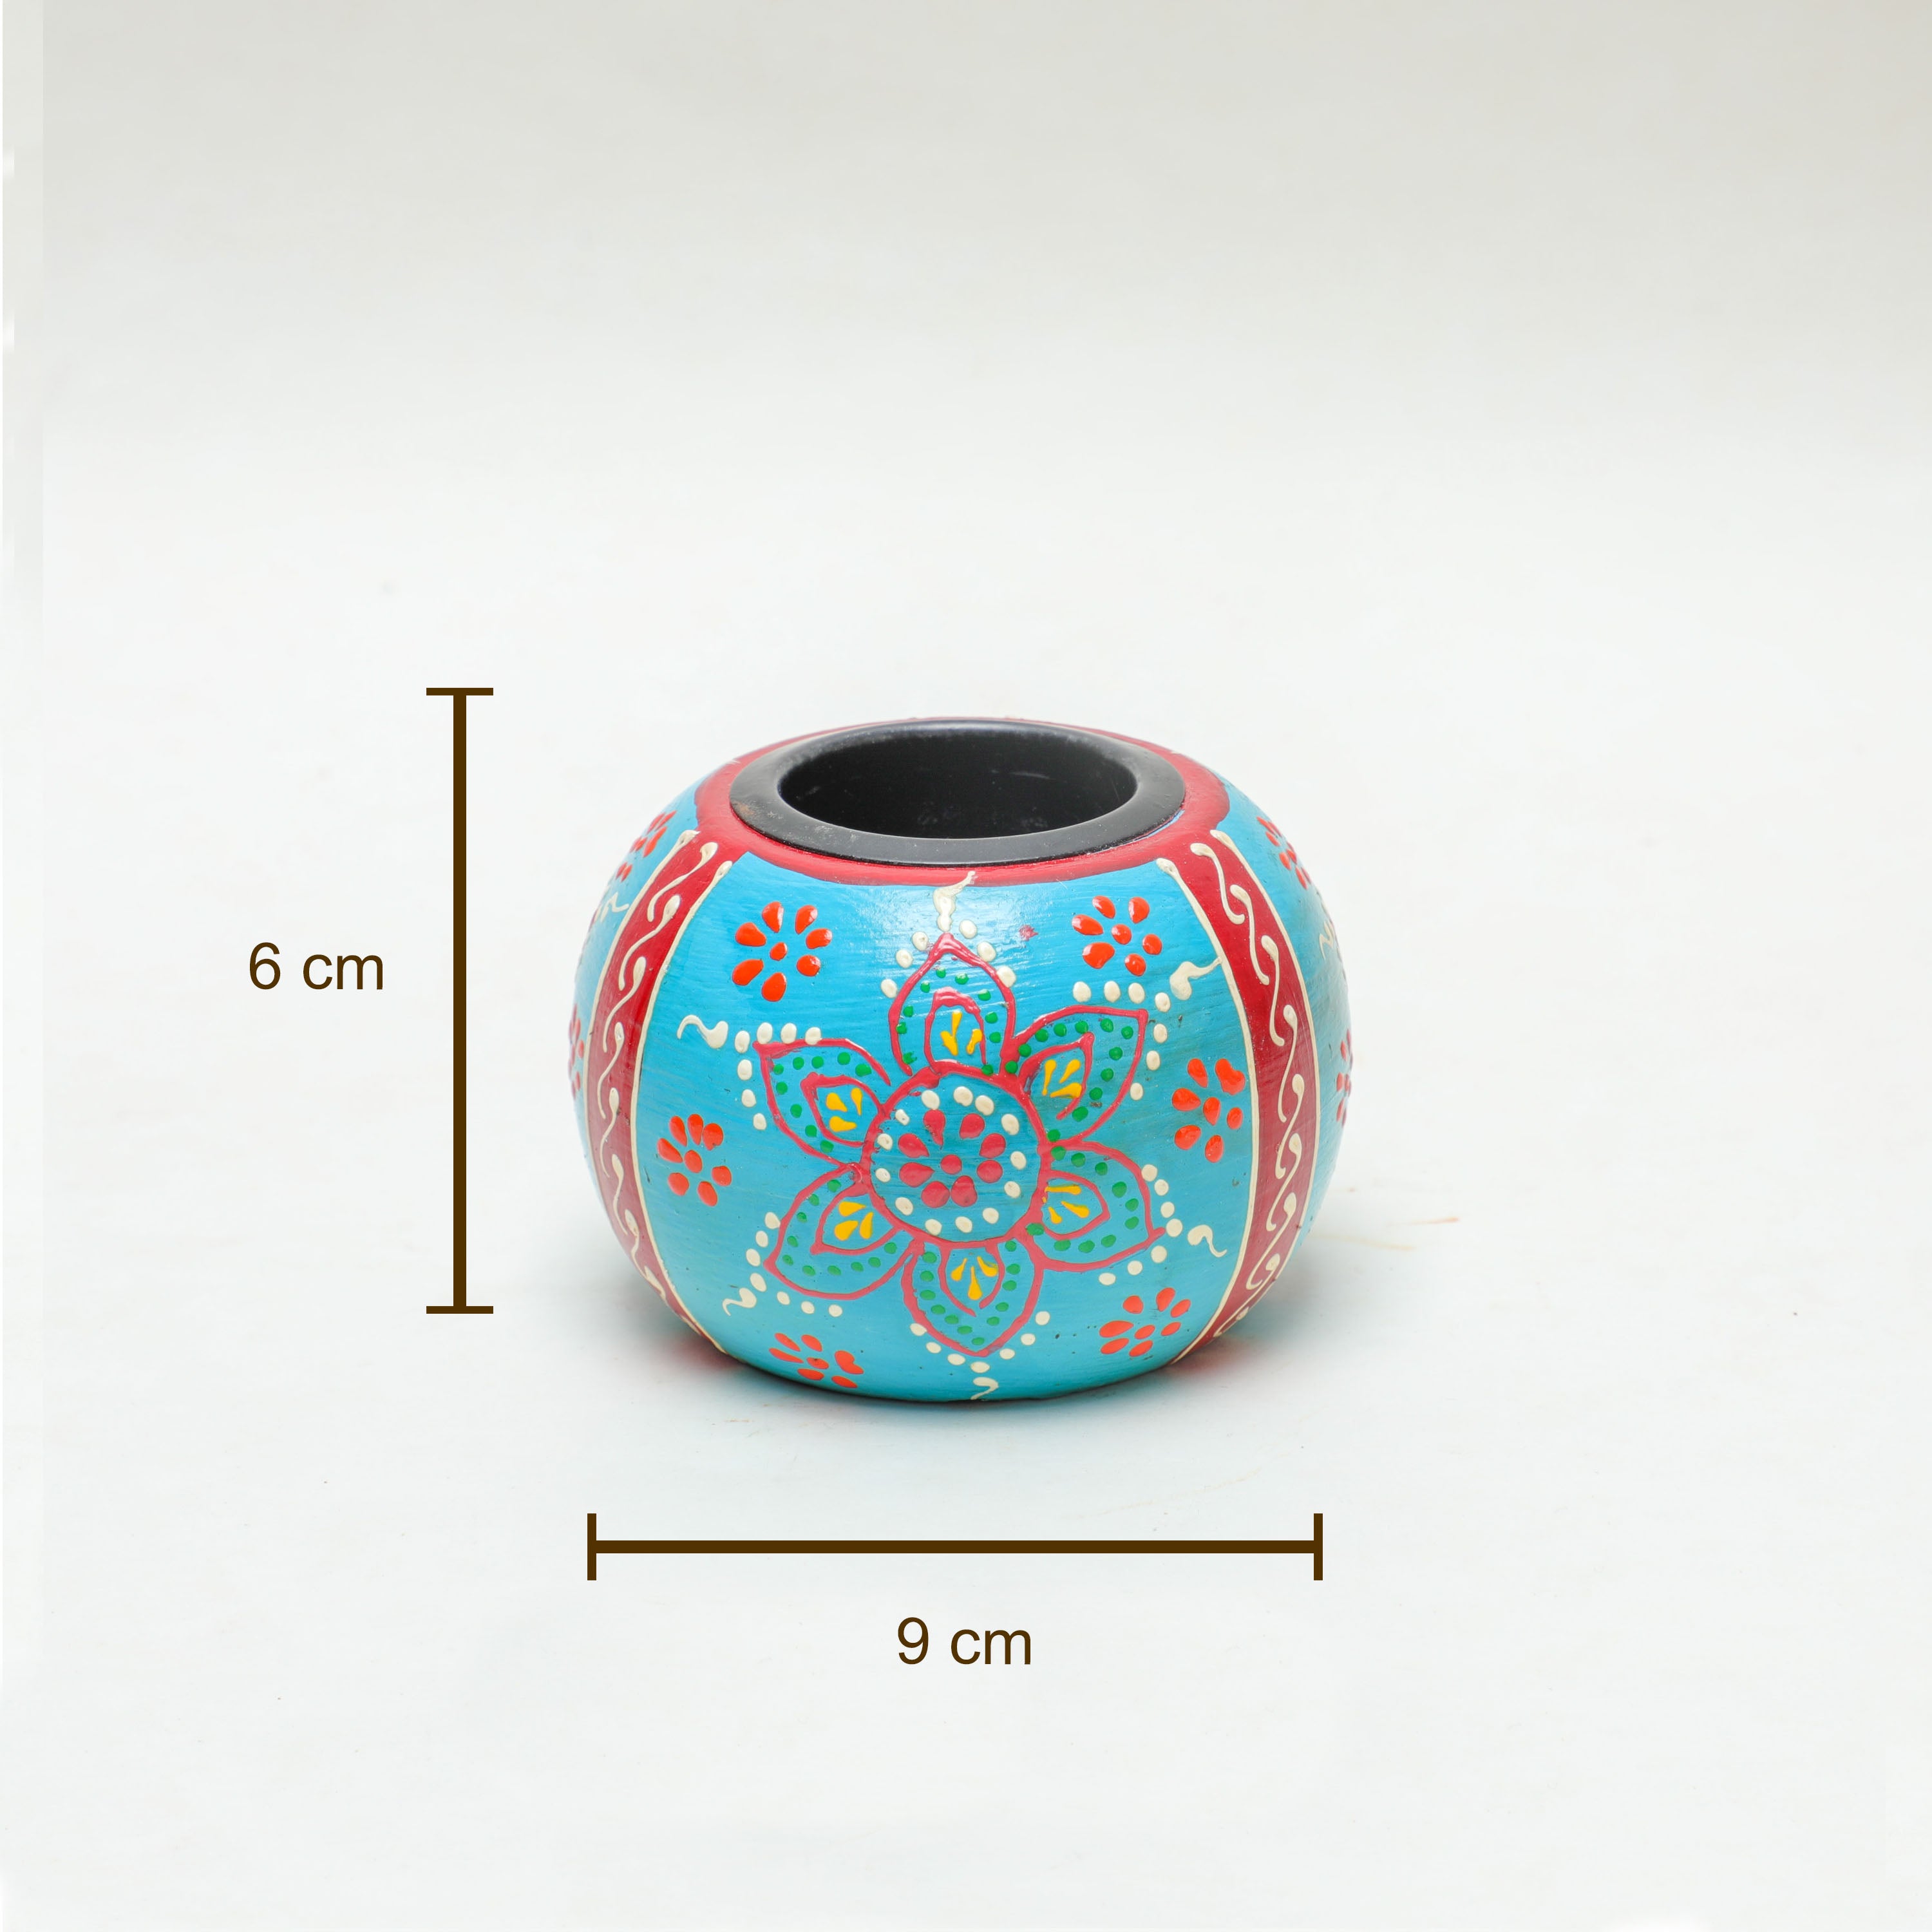 Small round tealight holder for birthday and anniversary gifting